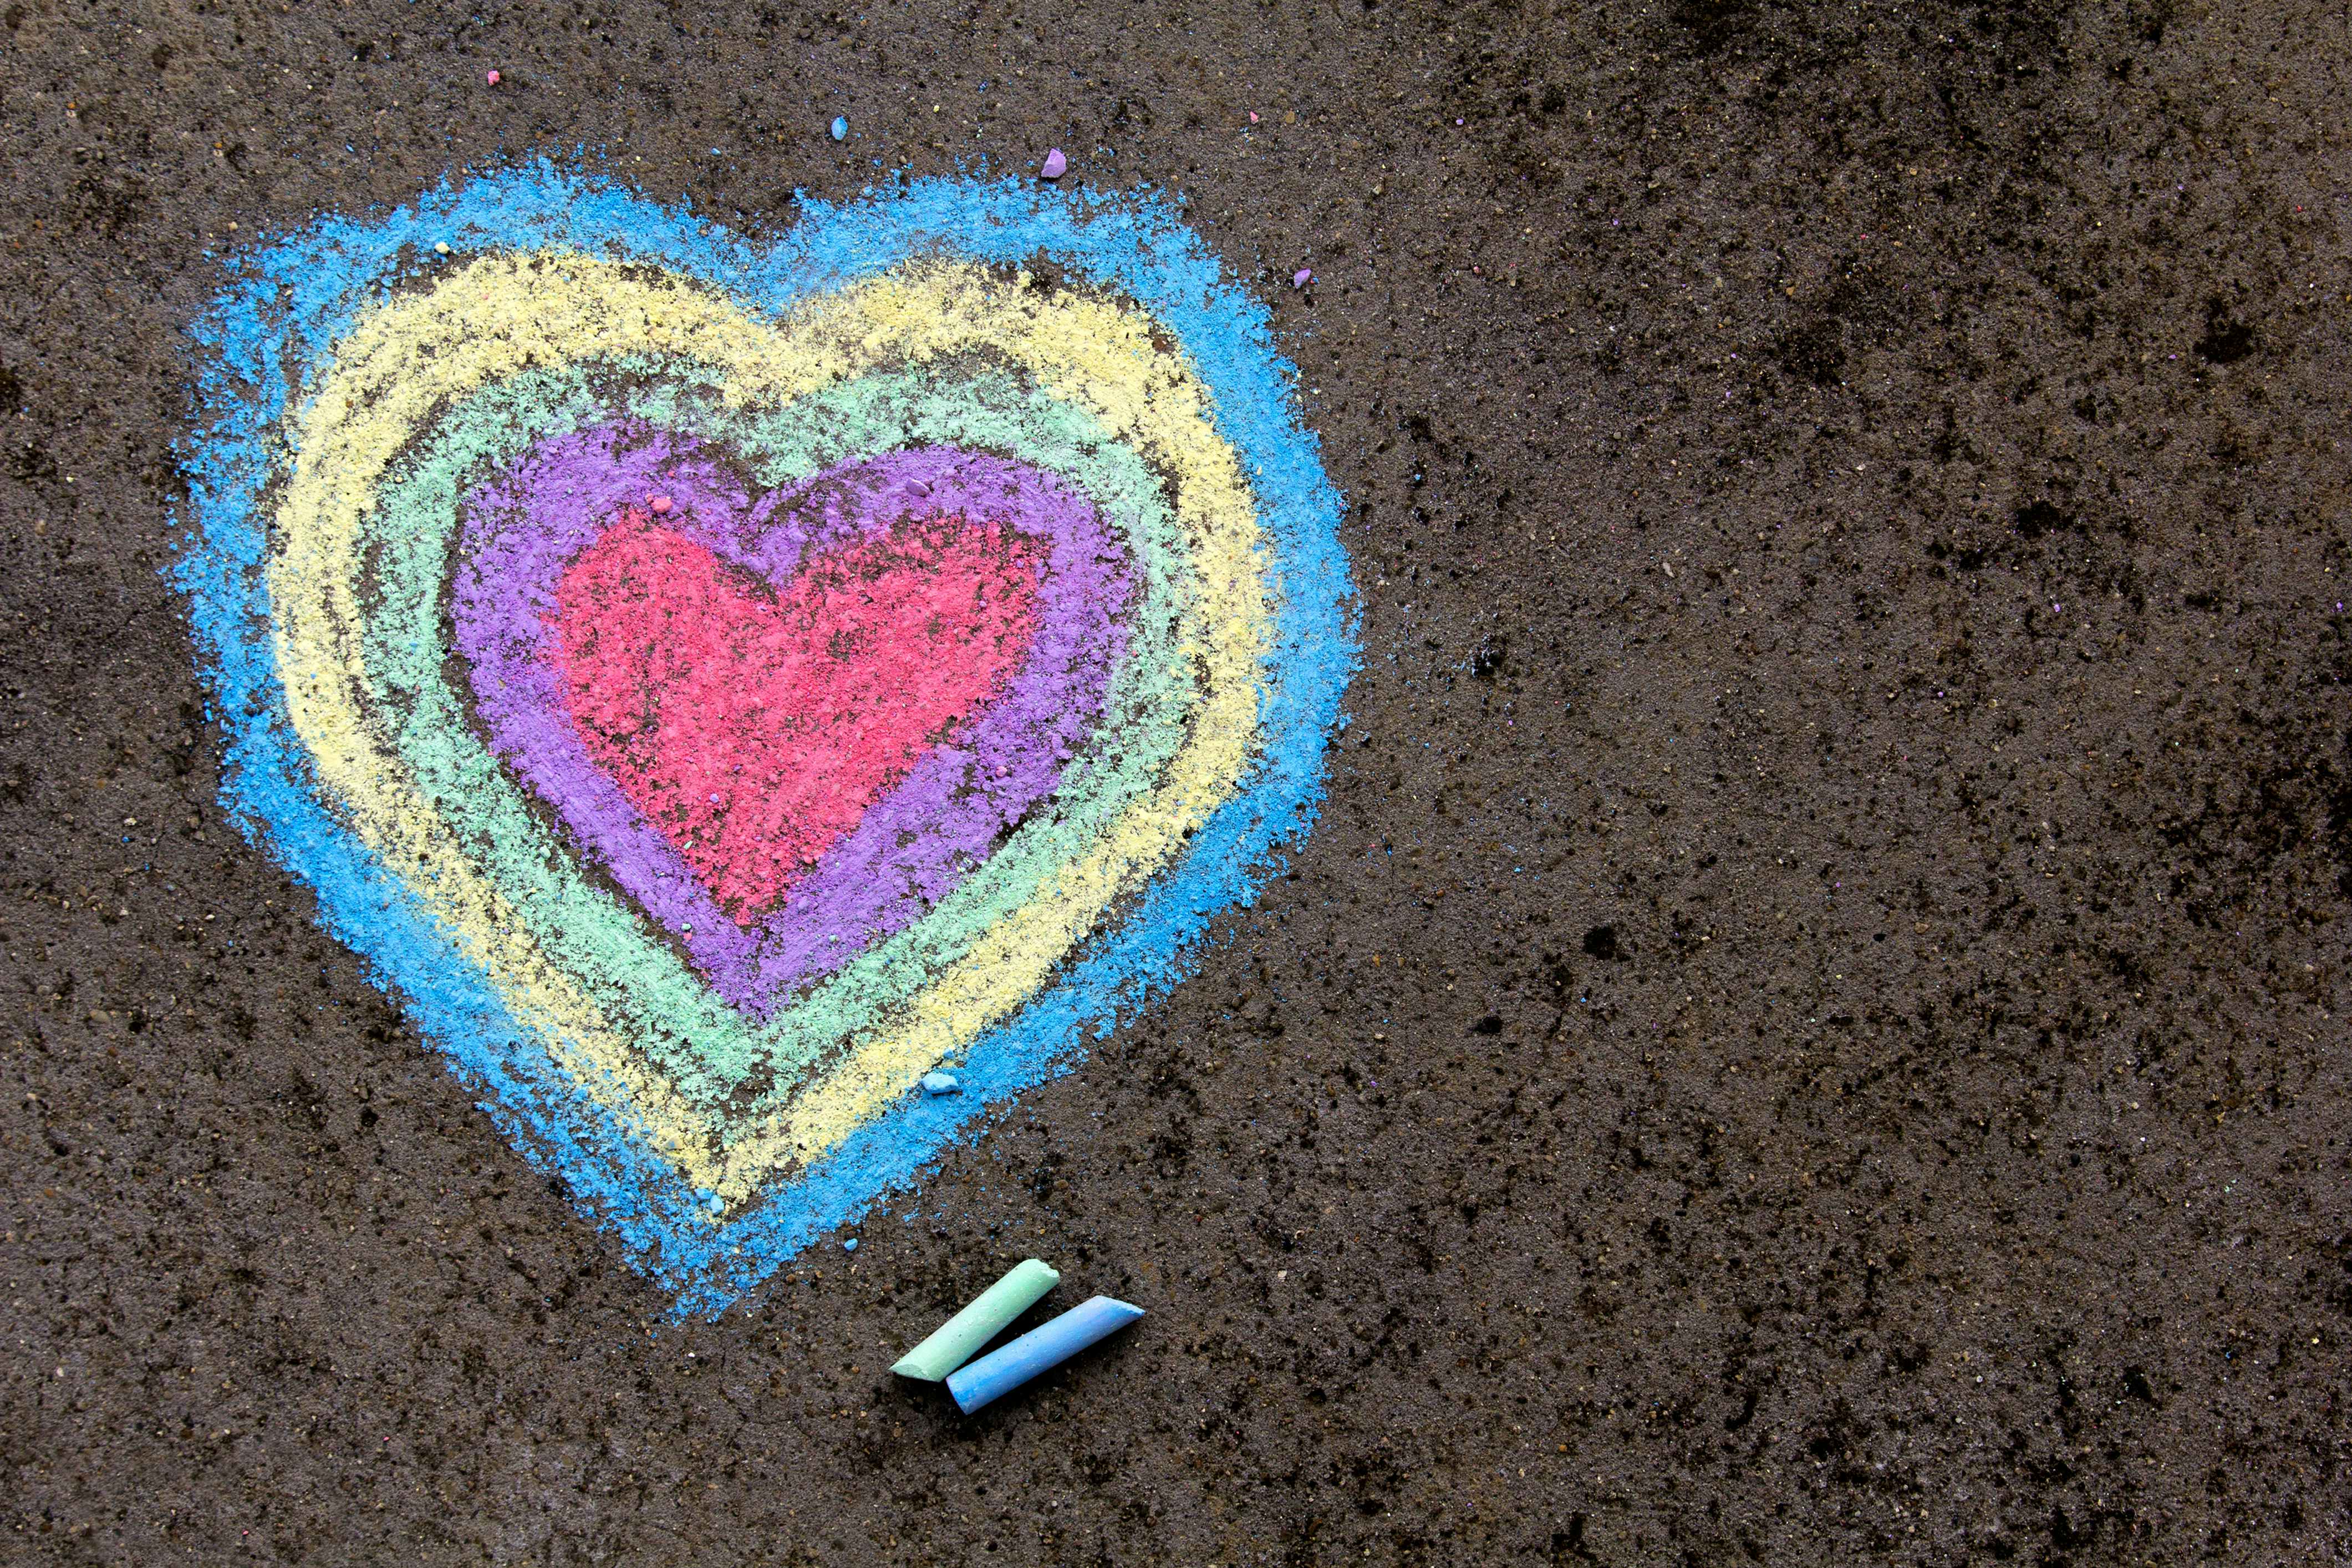 Multicolored chalk heart on pavement with two pieces of chalk next to it